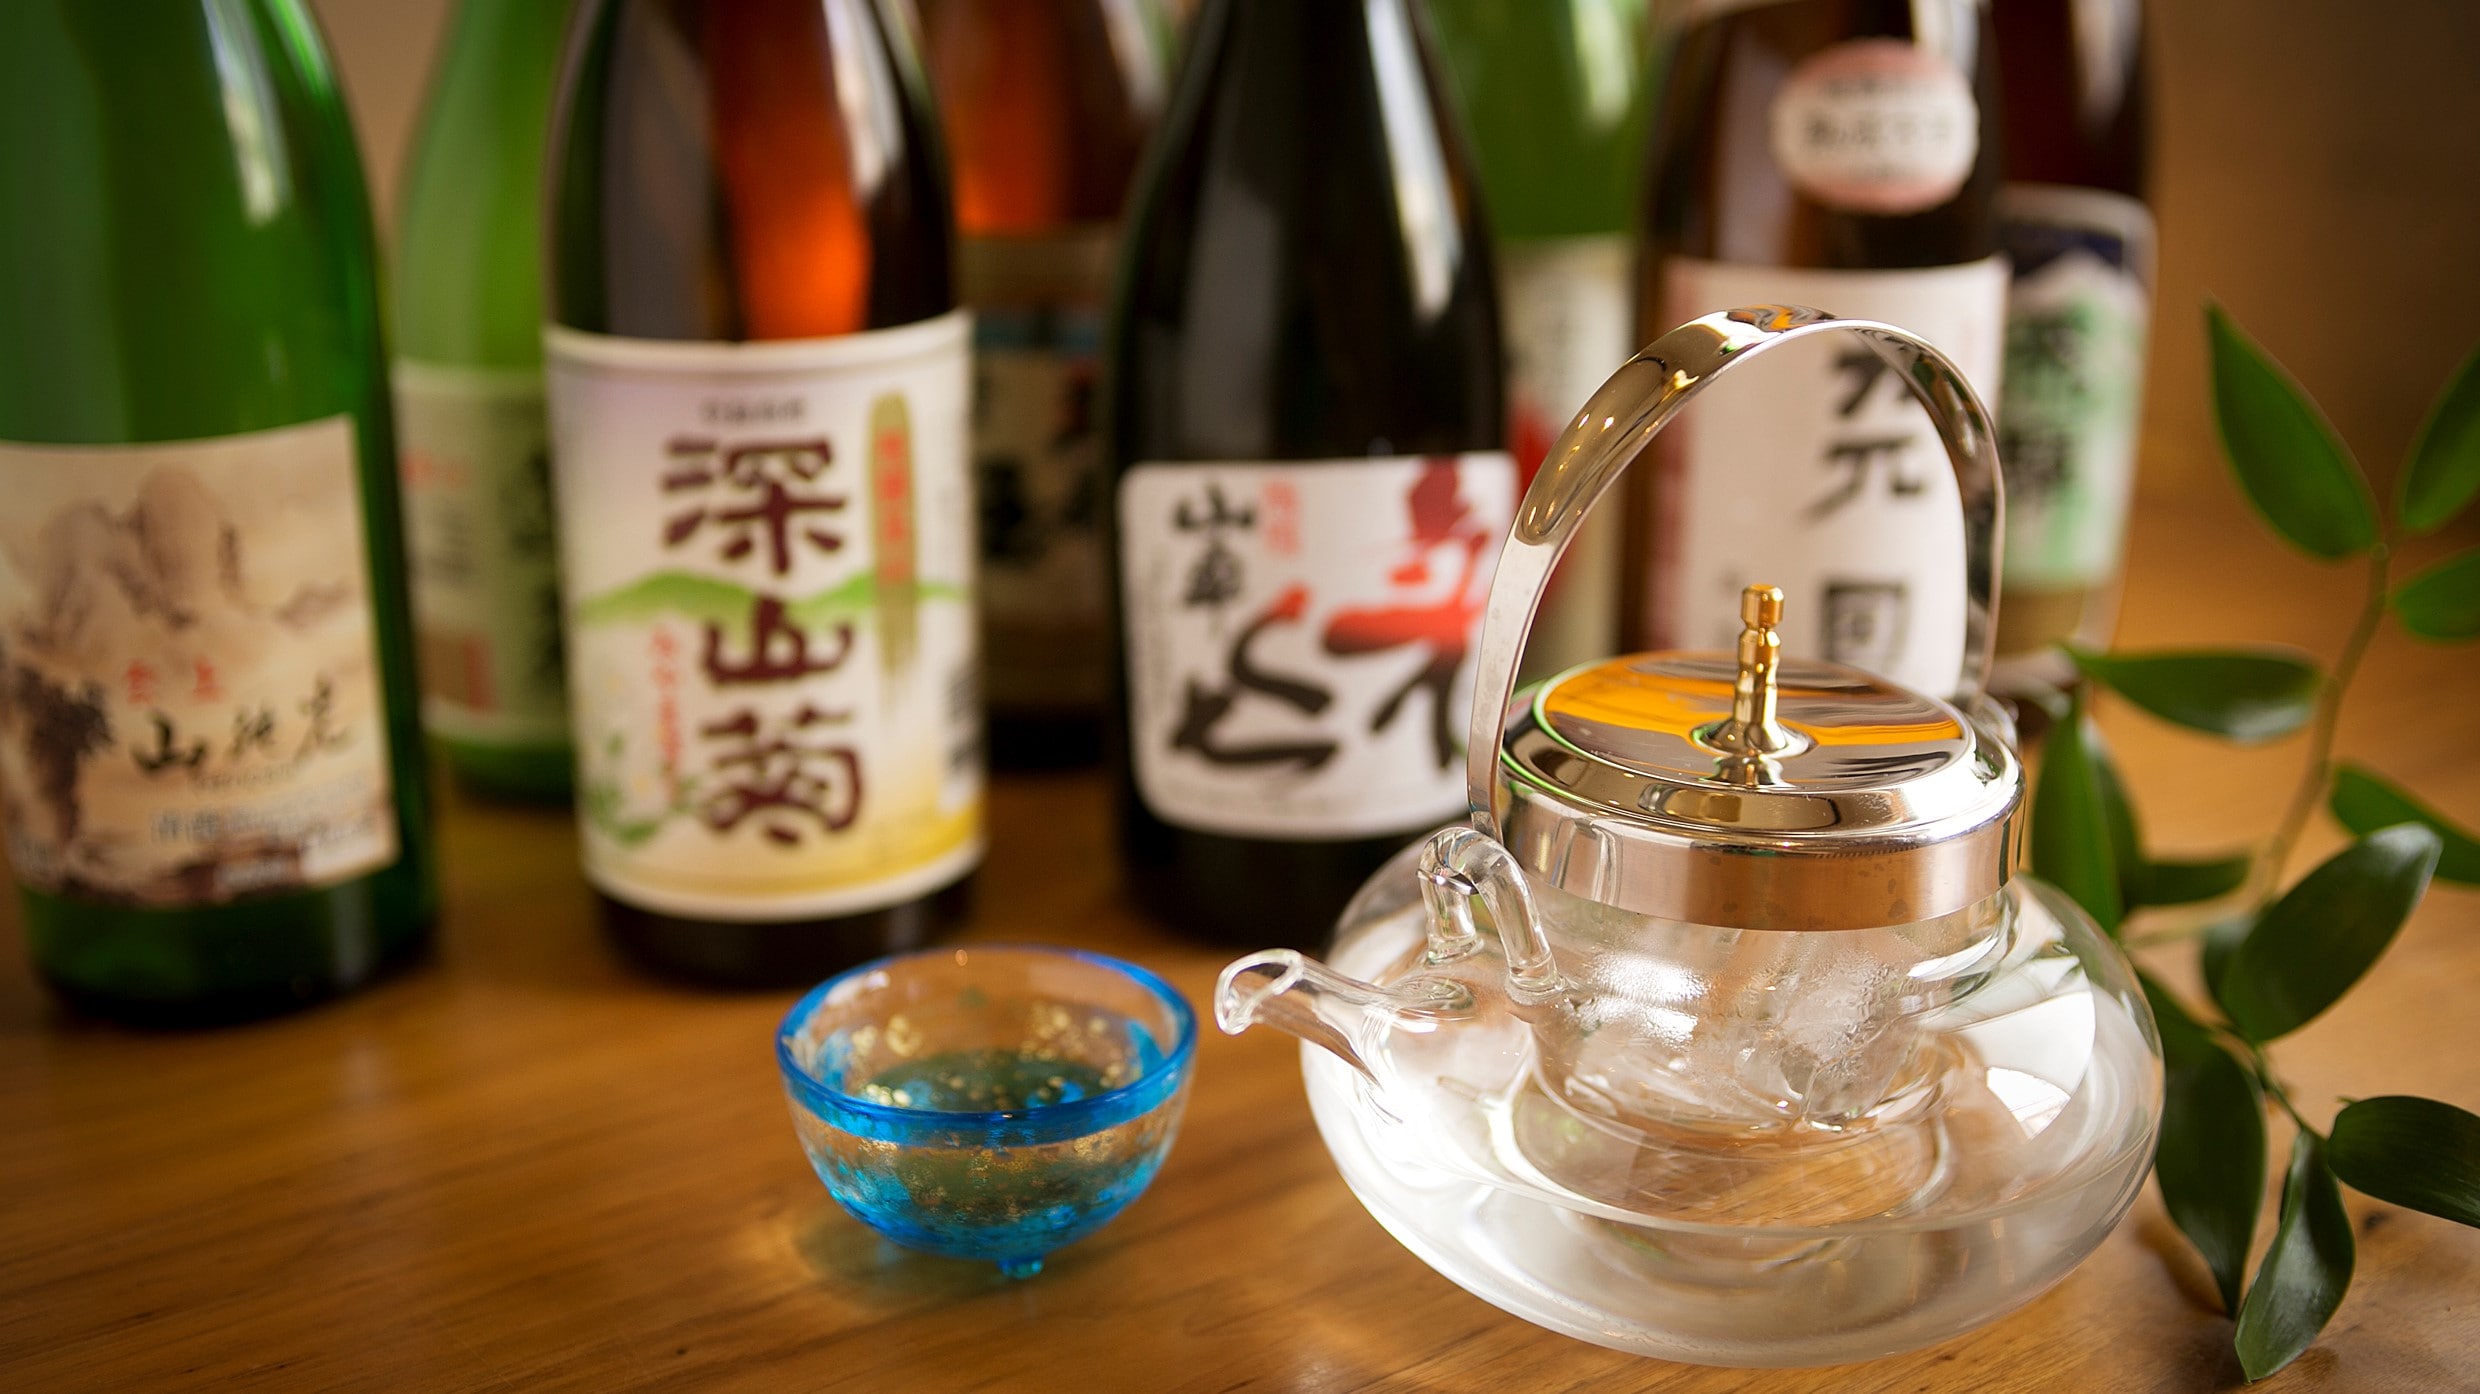 Sake brewing is also popular in Hida, which has delicious rice and abundant water. Each sake brewery is shaving and comparing the sake made ♪